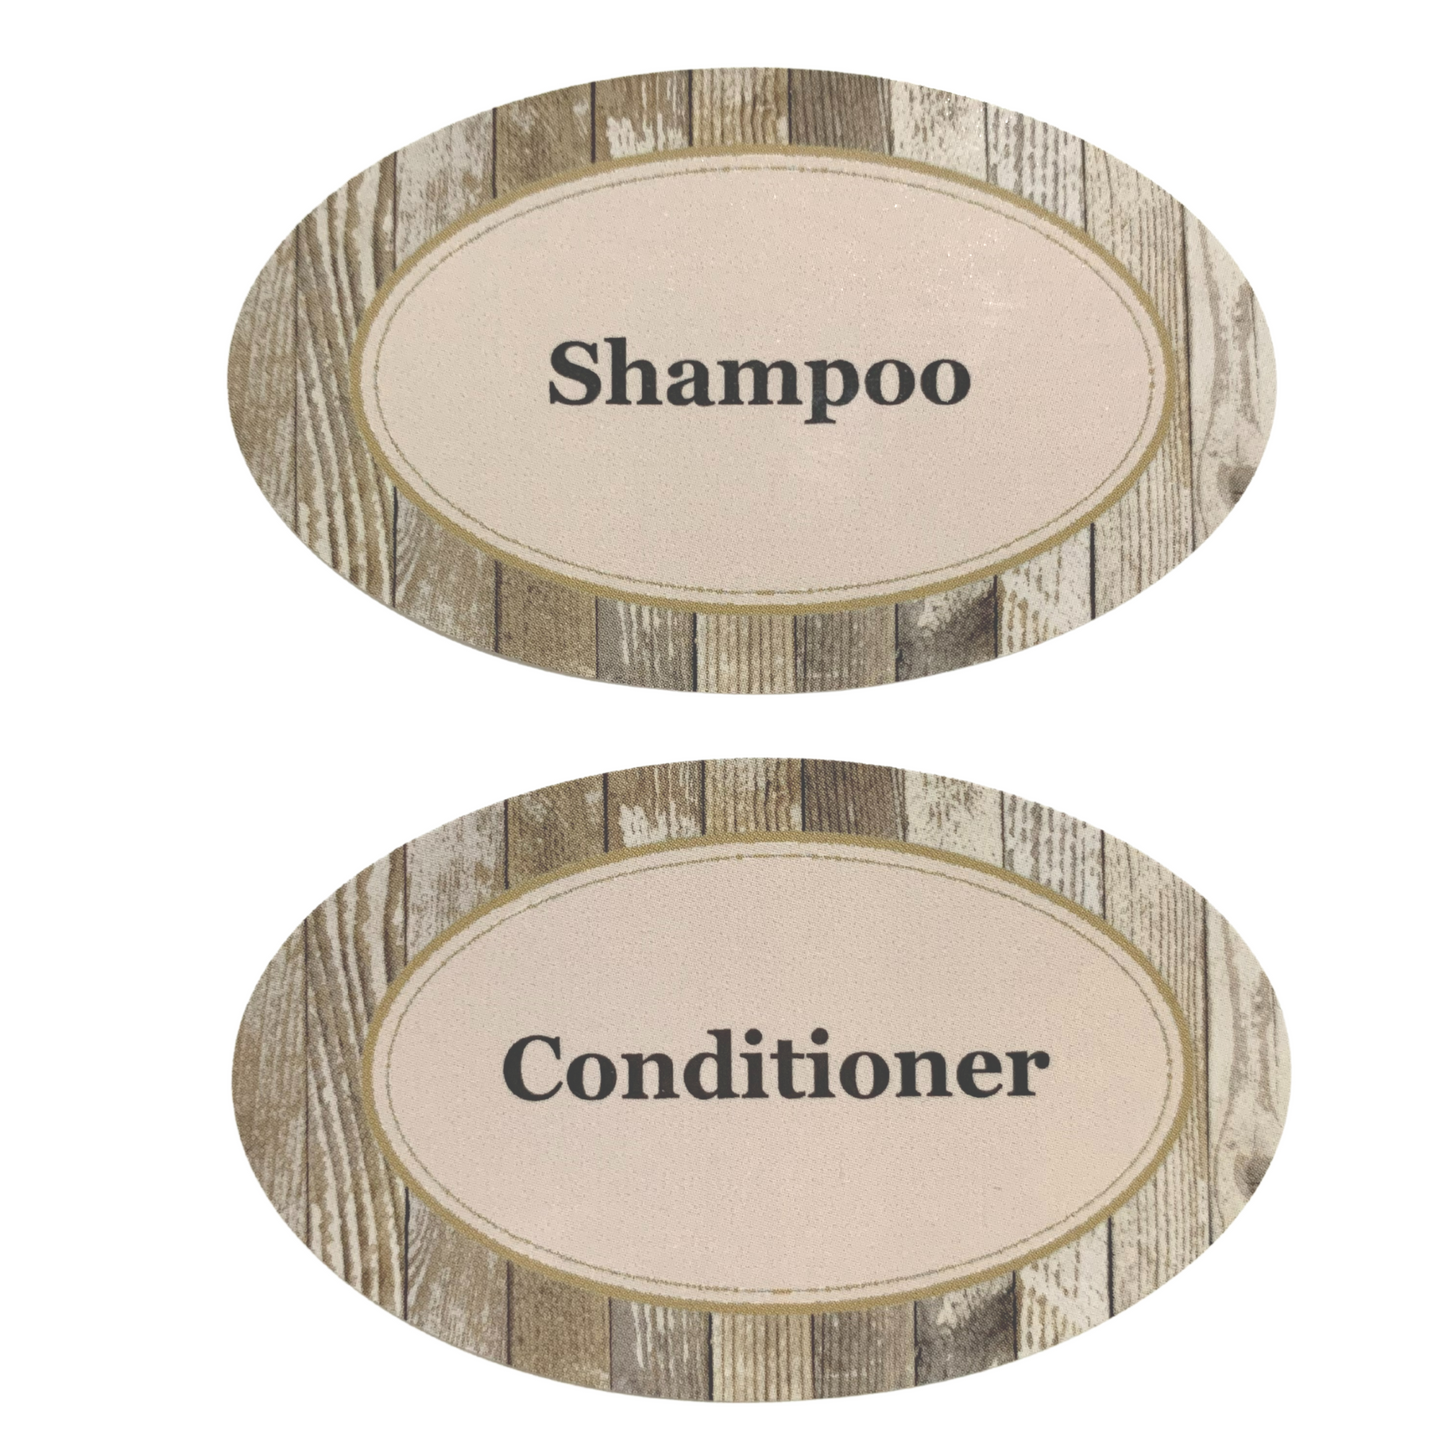 22 Pack Oval Waterproof Permanent Labels for Refillable Shampoo, Conditioner, Soap, Lotion and Household Product Bottles (1.5"x2.5")